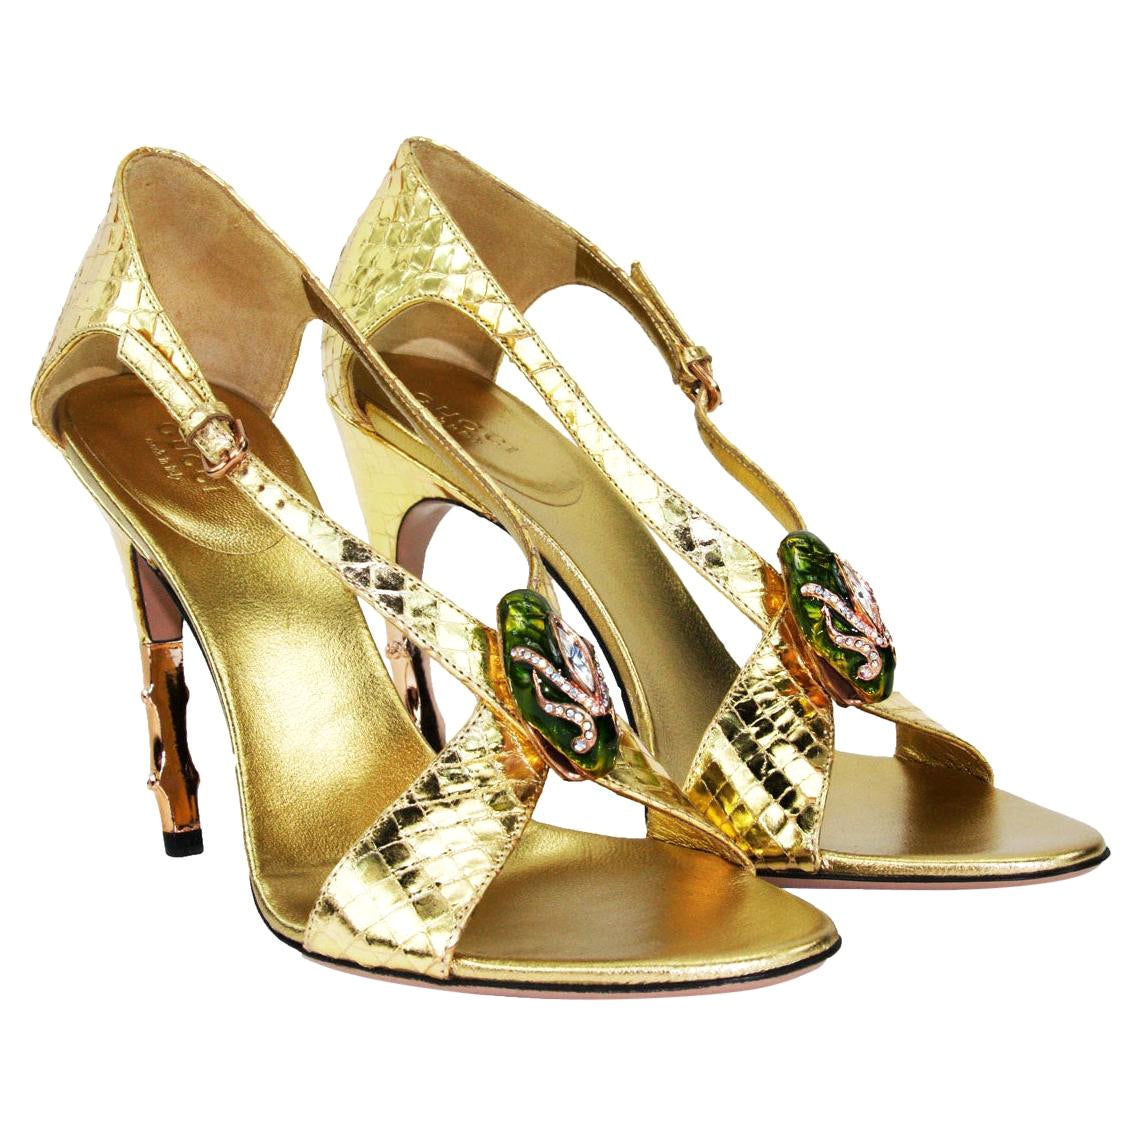 New Tom Ford for Gucci S/S 2004 Gold Python Jeweled Bamboo Heel Shoes 9.5 - 39.5 For Sale